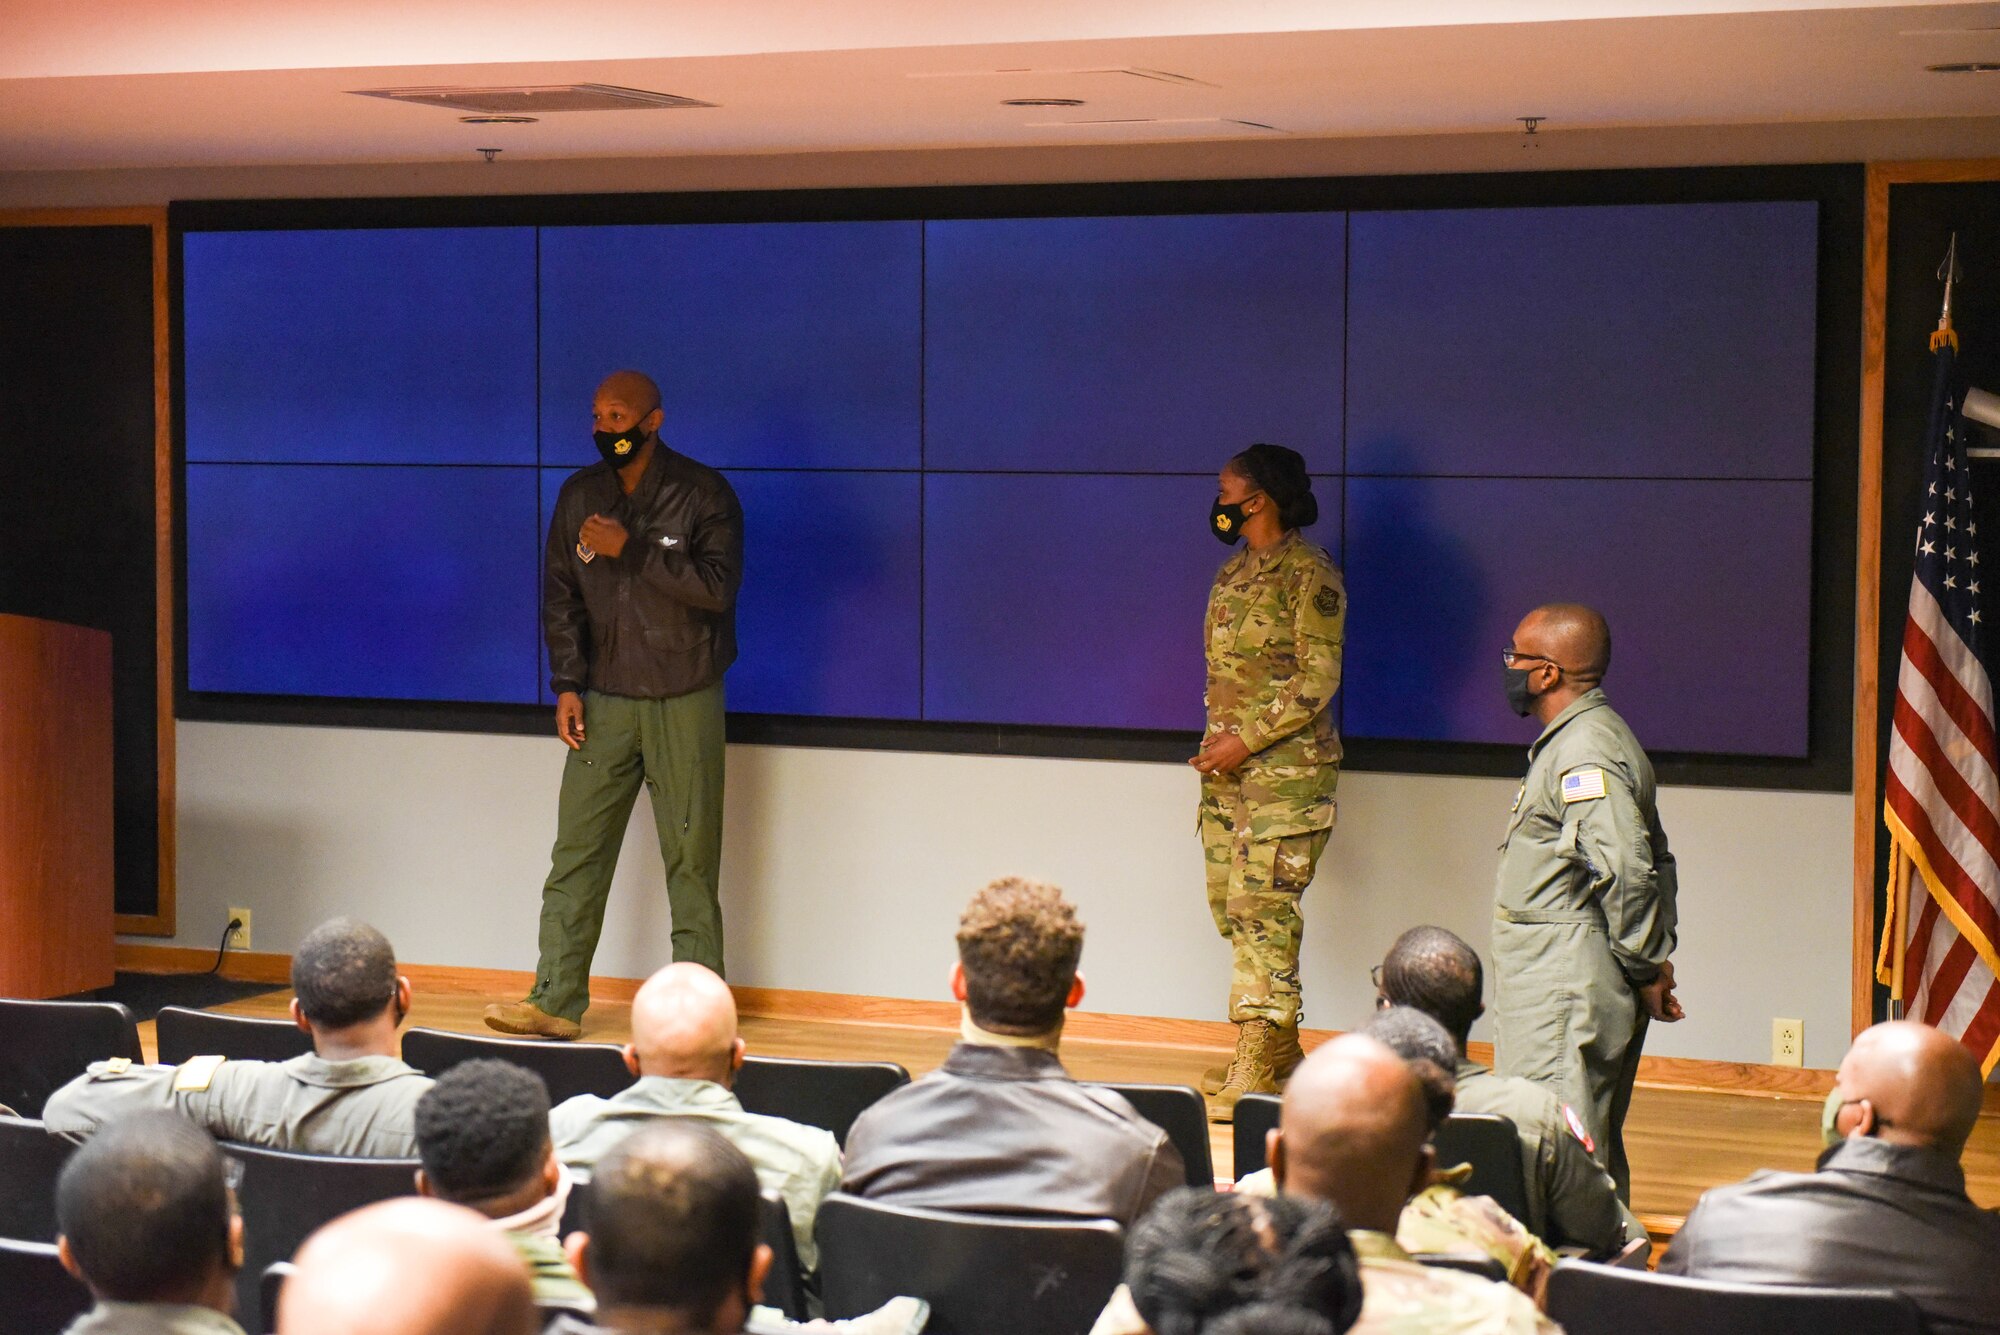 Col. Jaron H. Roux, 437th Airlift Wing commander, and Chief Master Sgt. Charmaine N. Kelley, 437th Airlift Wing command chief master sergeant, Joint Base Charleston, greet a room of black enlisted Airmen on Joint Base Charleston, S.C., Feb. 19, 2021. Black Airmen from six different Air Force installations were invited to Joint Base Charleston for an event honoring the contributions and heritage of black Airmen for Black History Month. (U.S. Air Force photo by Senior Airman Mikayla Heineck)